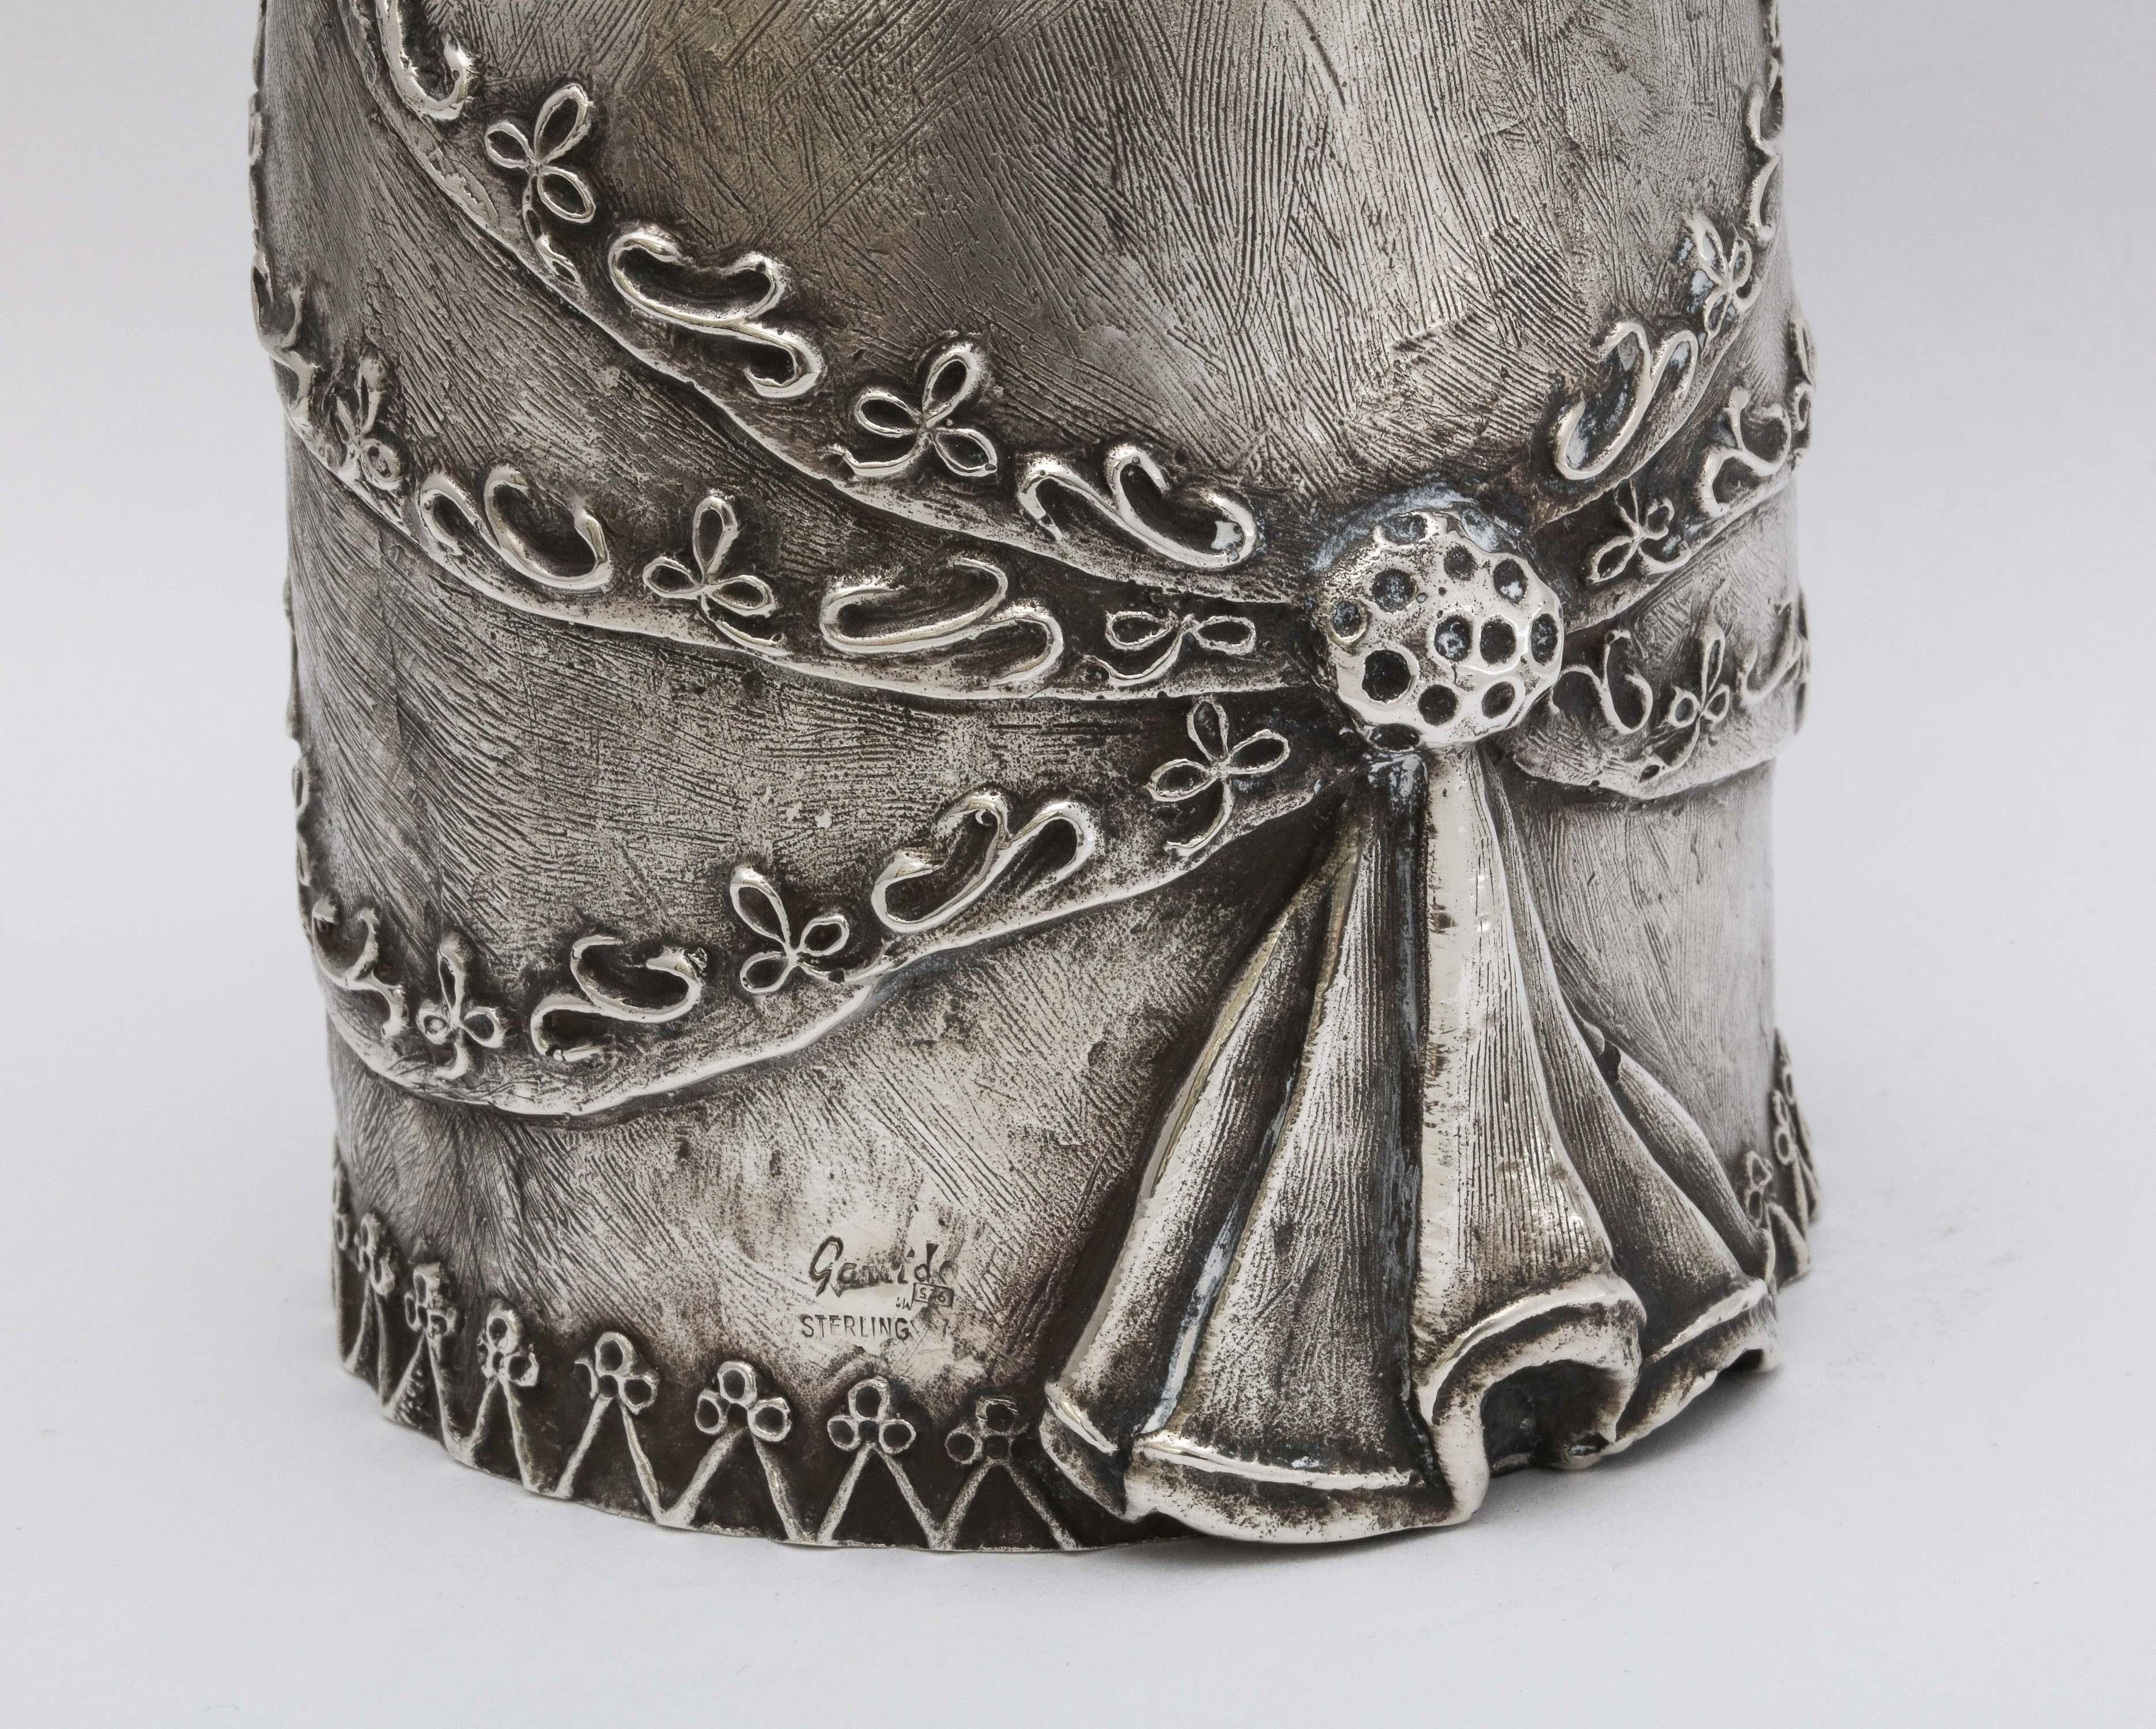 Large 17th Century-Style Sterling Silver Wager/Marriage Cup 3